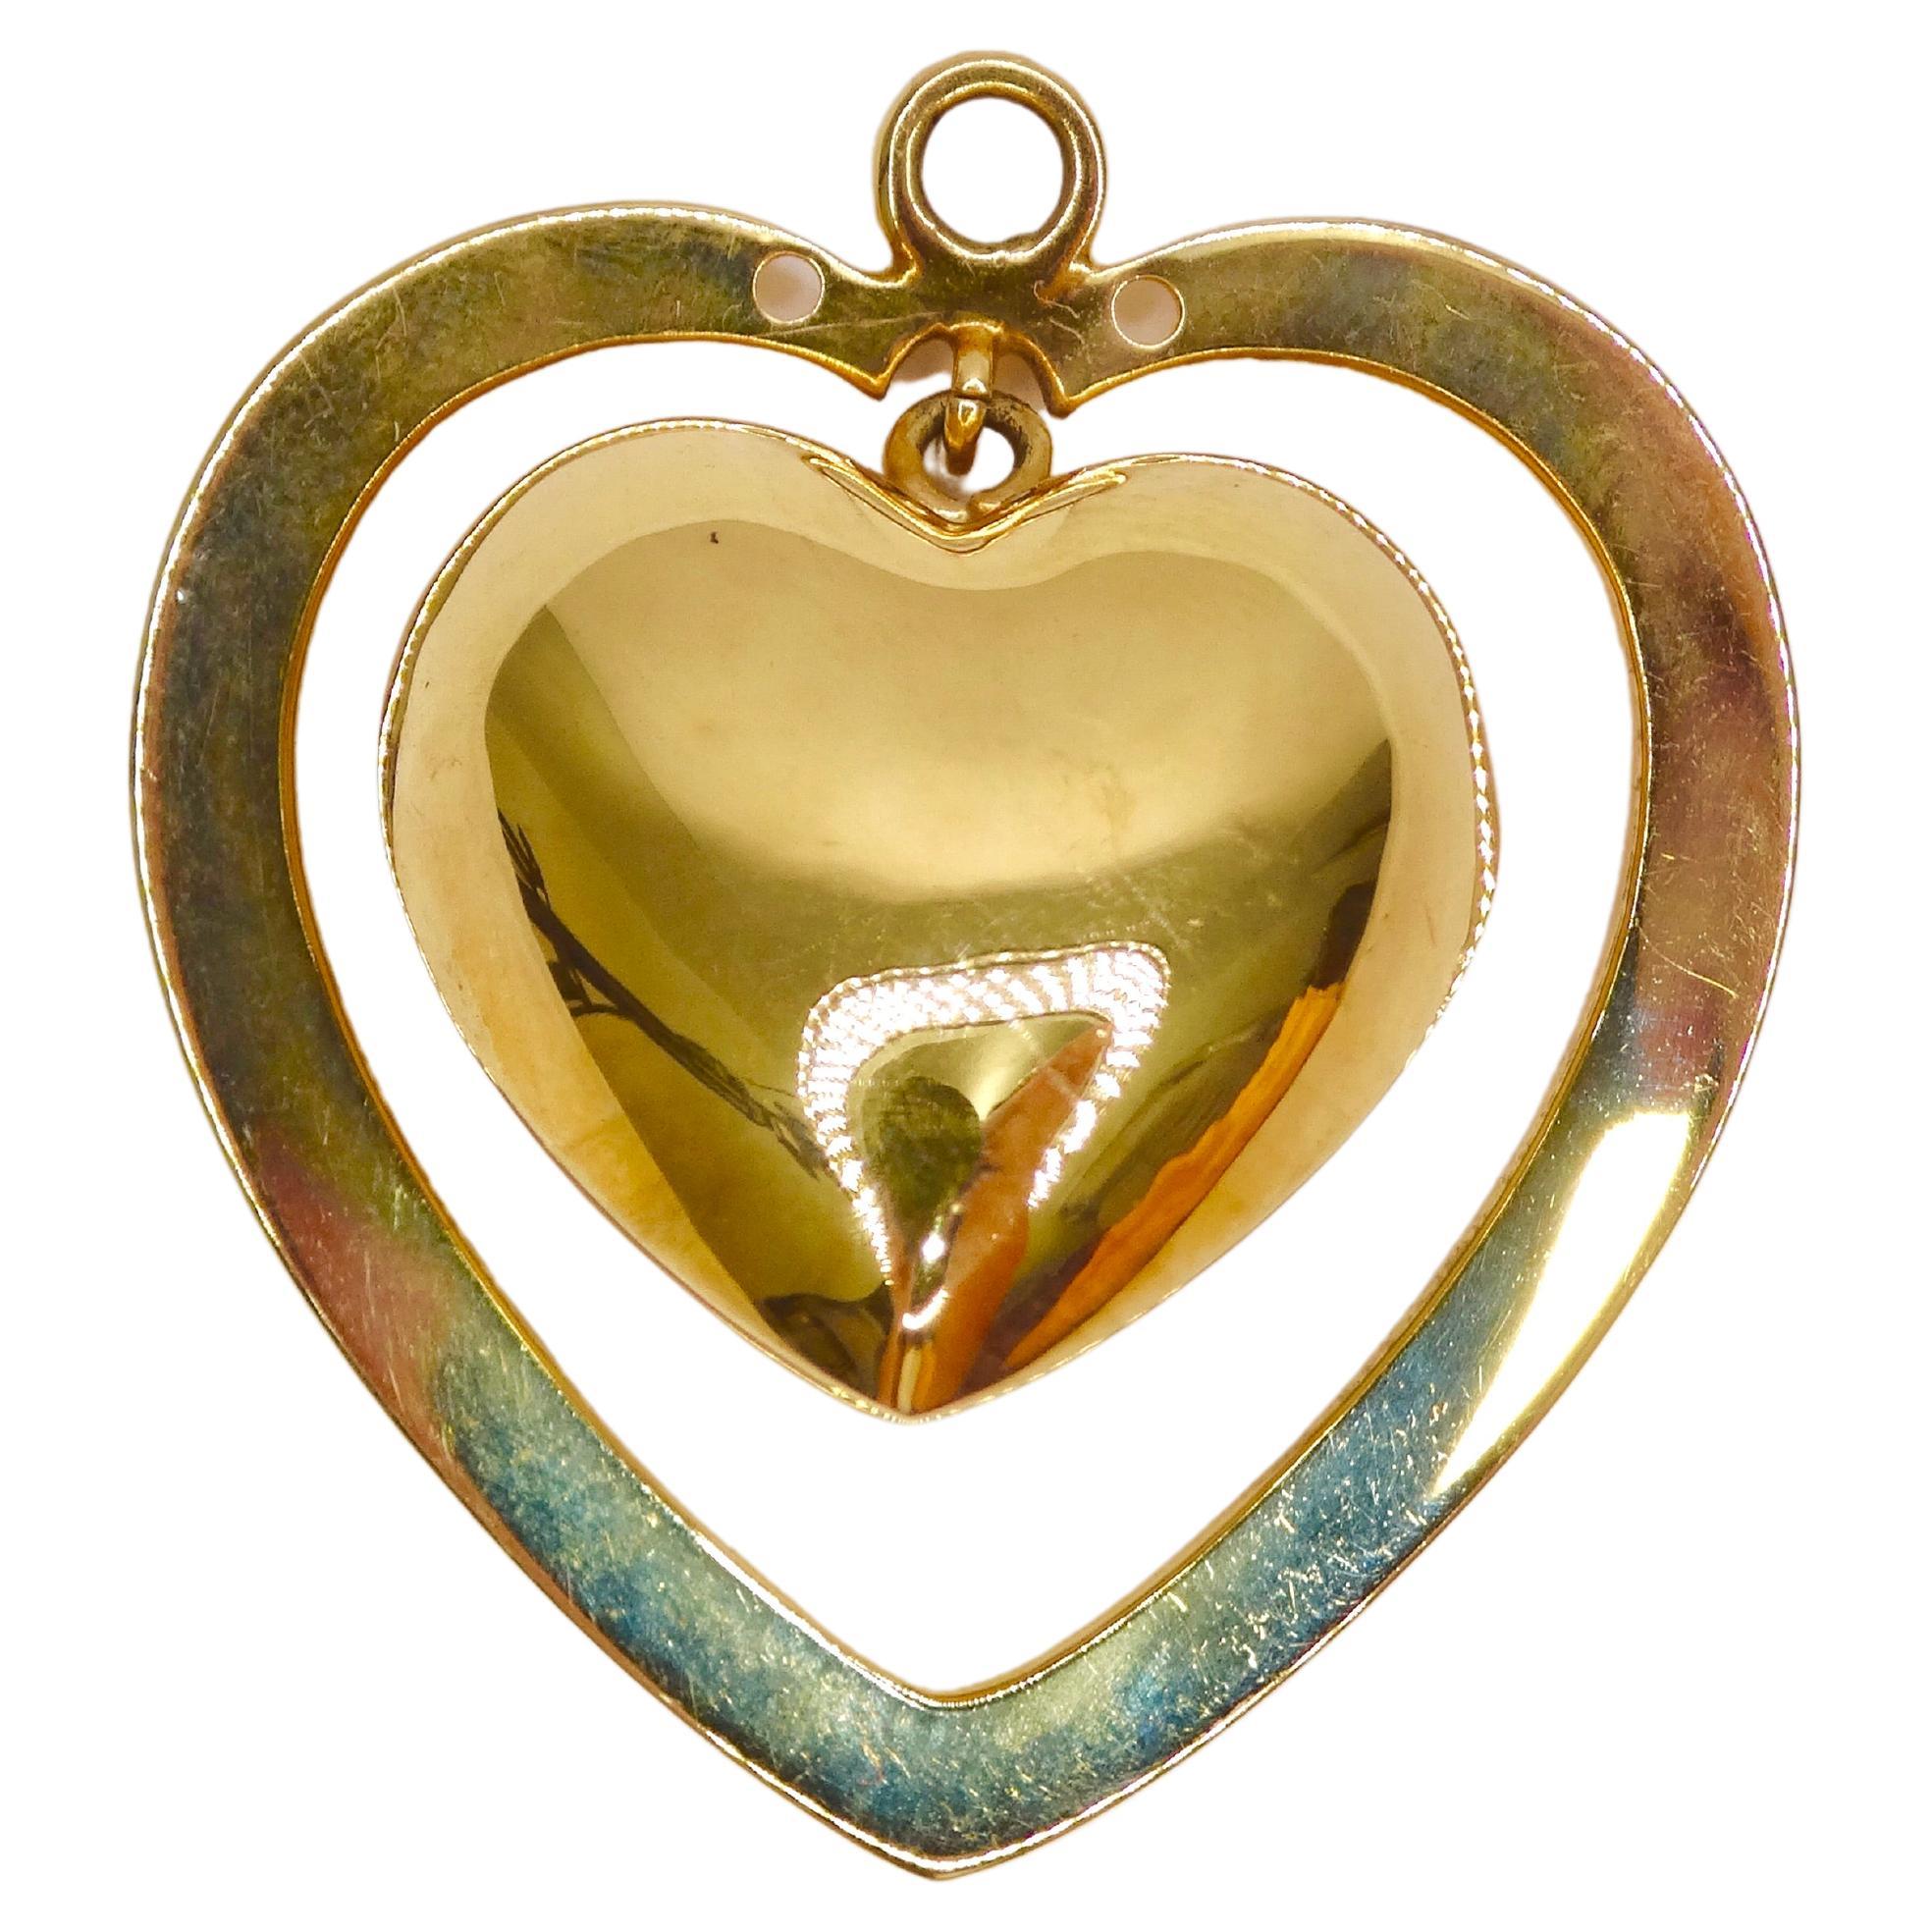 Keep your outfit fun and flirty with this 3D double-heart pendant. Details include a 3D bell heart surrounded by a larger flat heard. You won't have to wait until Valentine's day to pull off this necklace as the simple 14k Gold will match any of